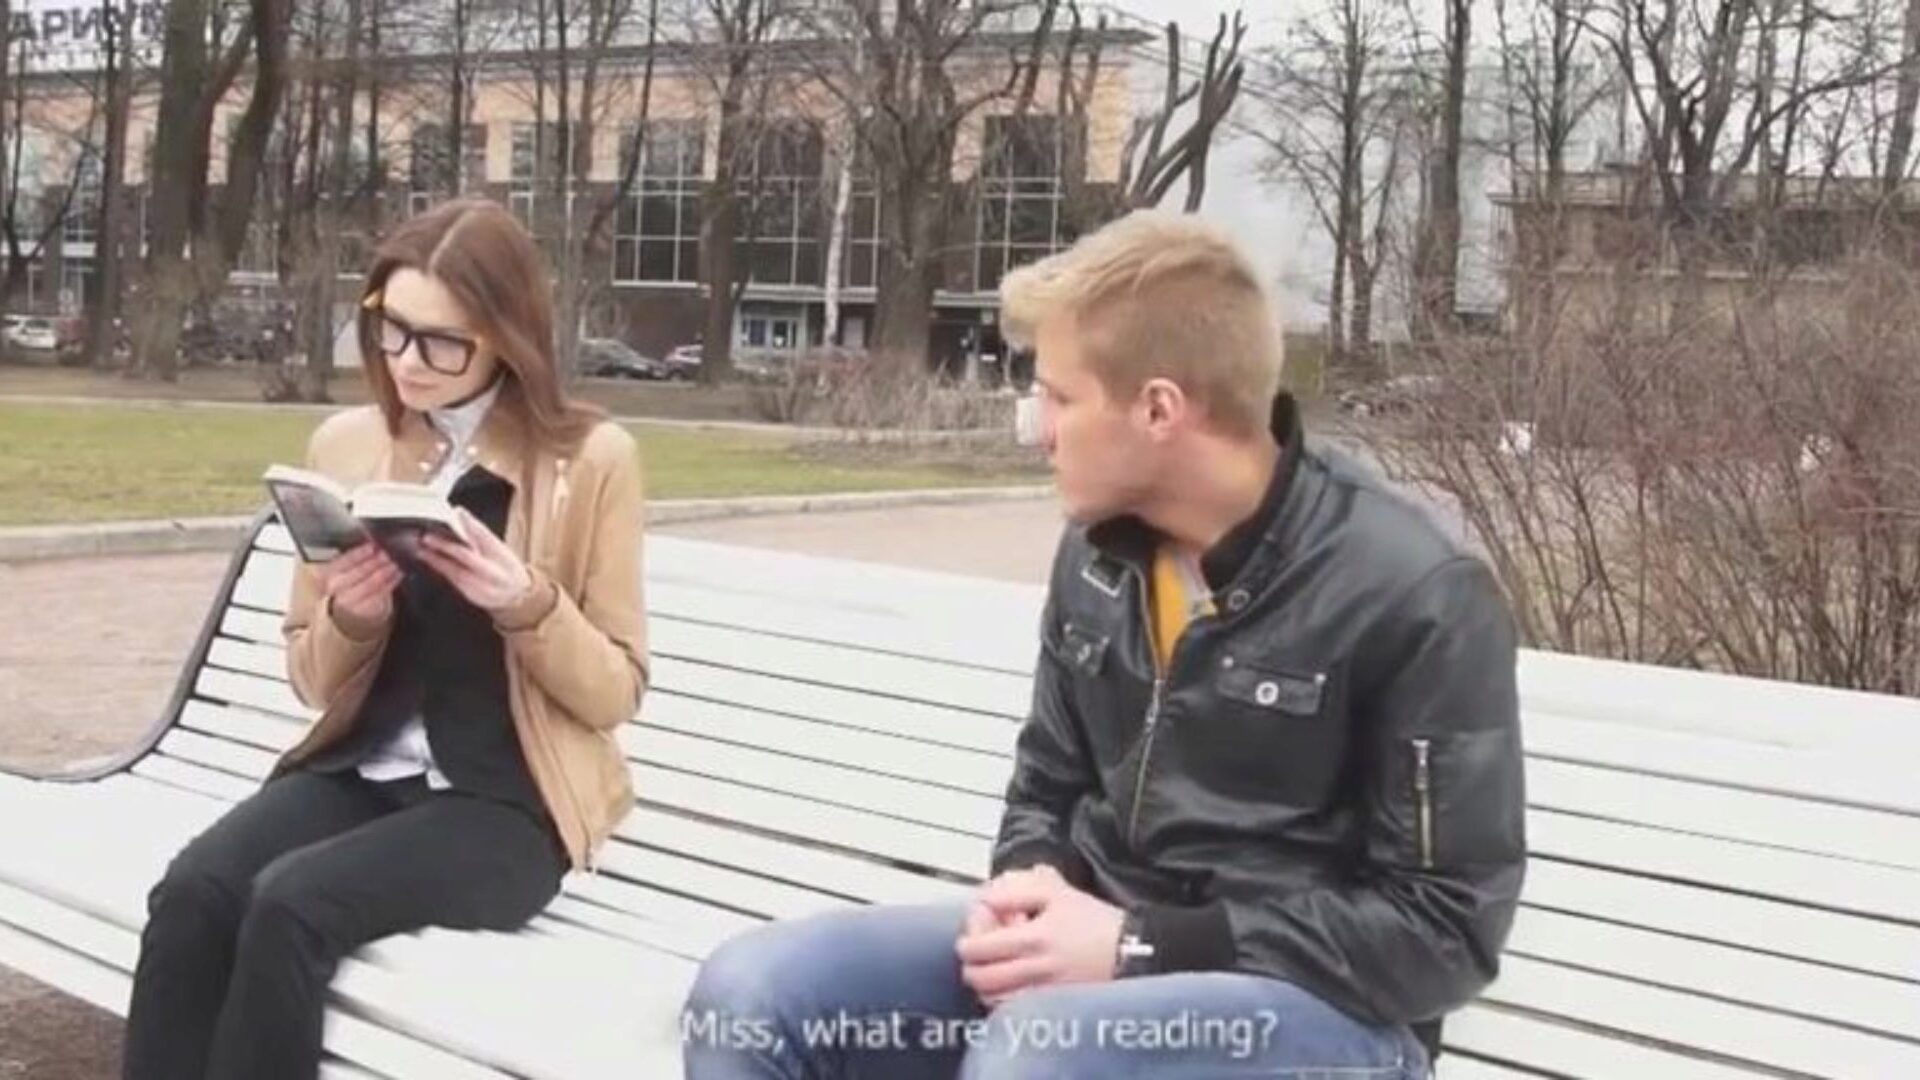 This Babe Is Nerdy - Dila - the Sex Geometry This nerdy teeny looks so cute reading the book on geometry in a park and when a gracious chap suggests her aid in inspecting for tomorrows exam that babe promptly agrees